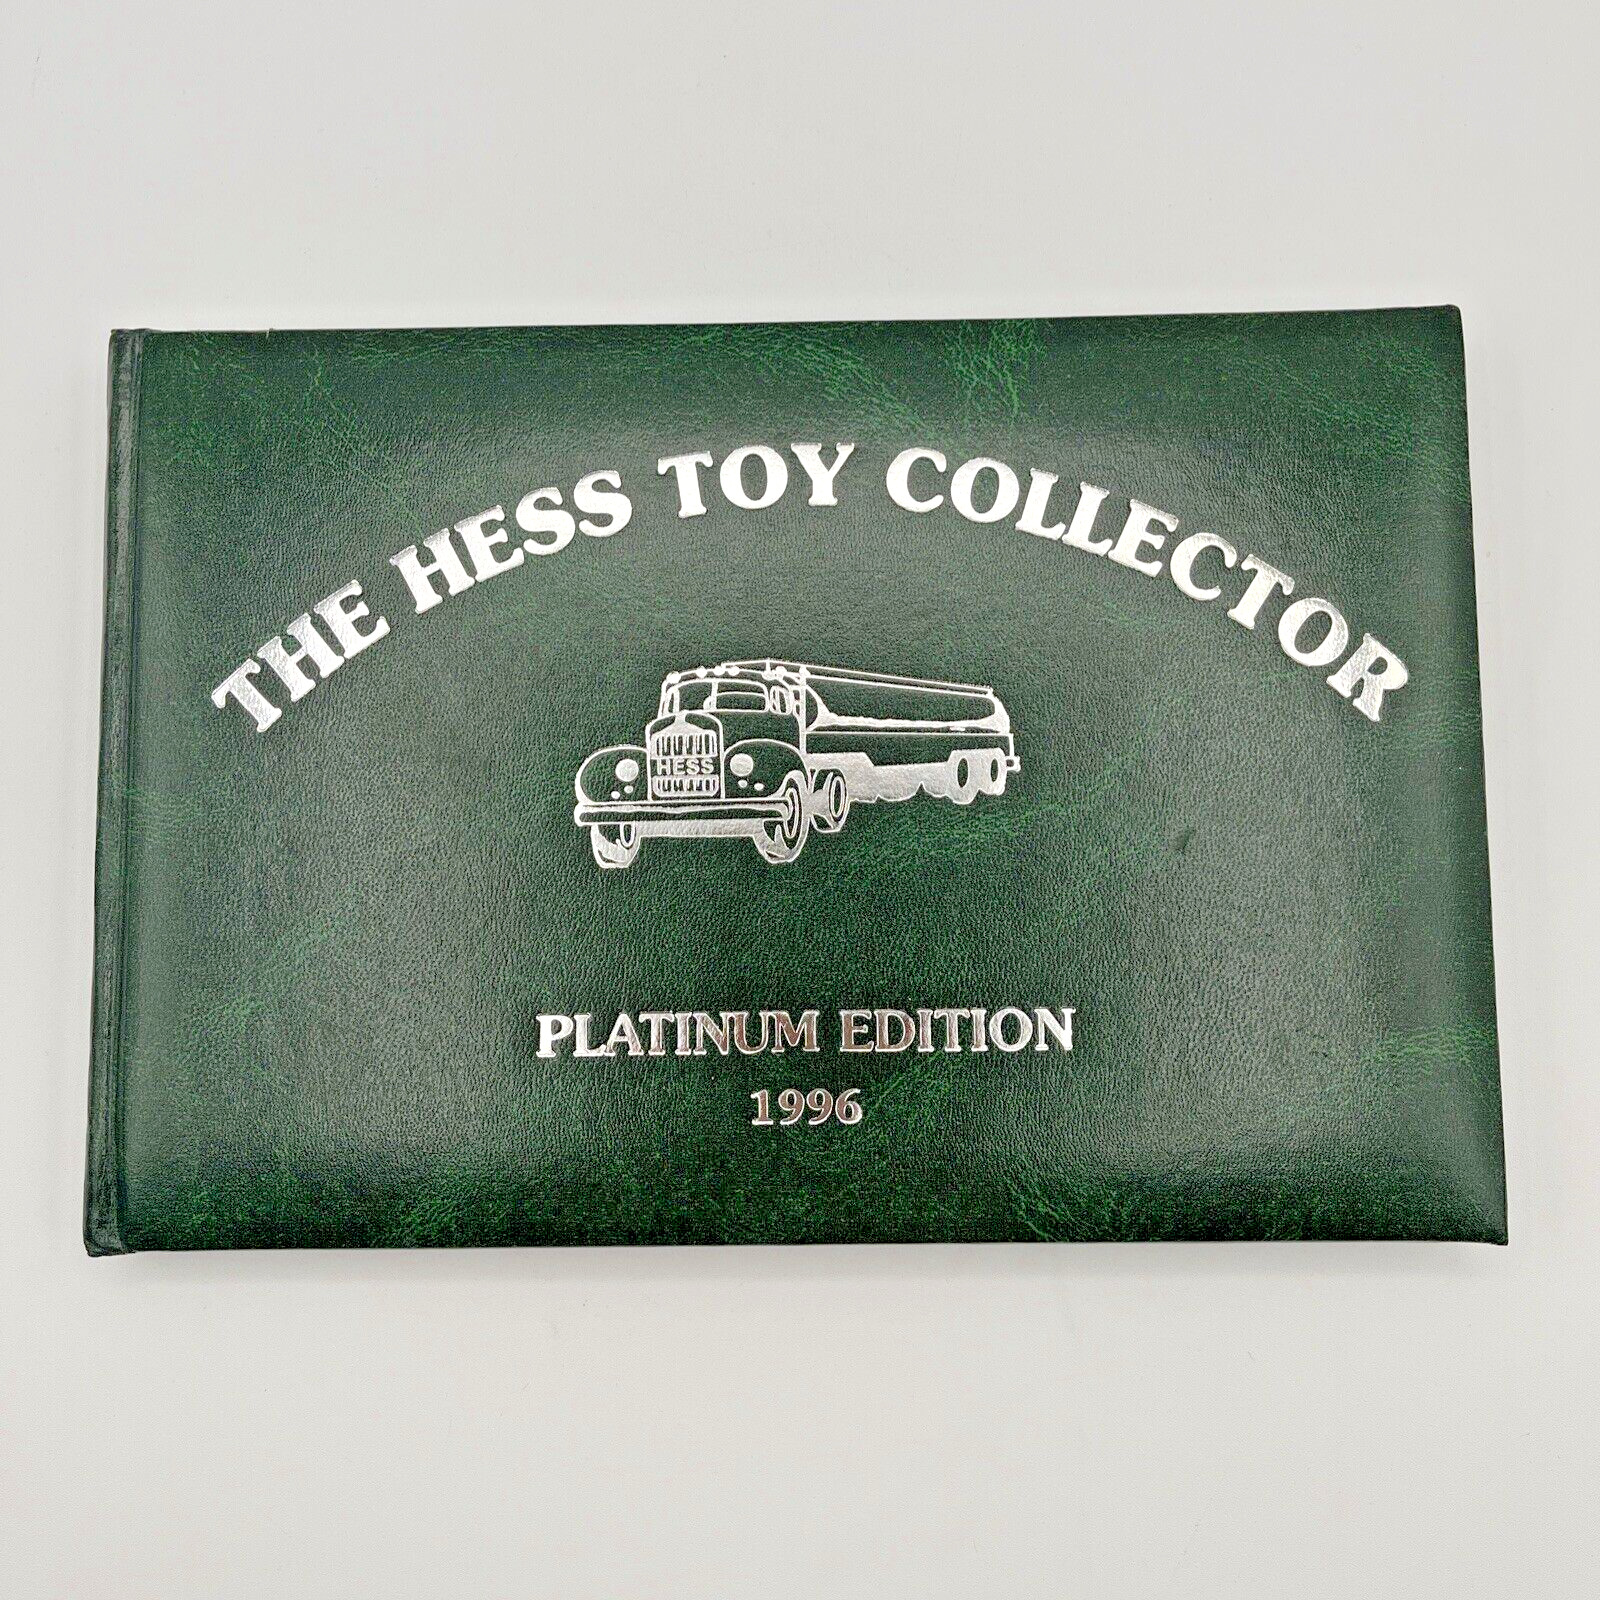 The Hess Toy Collector Platinum Edition 1996 Book Number 532/5000